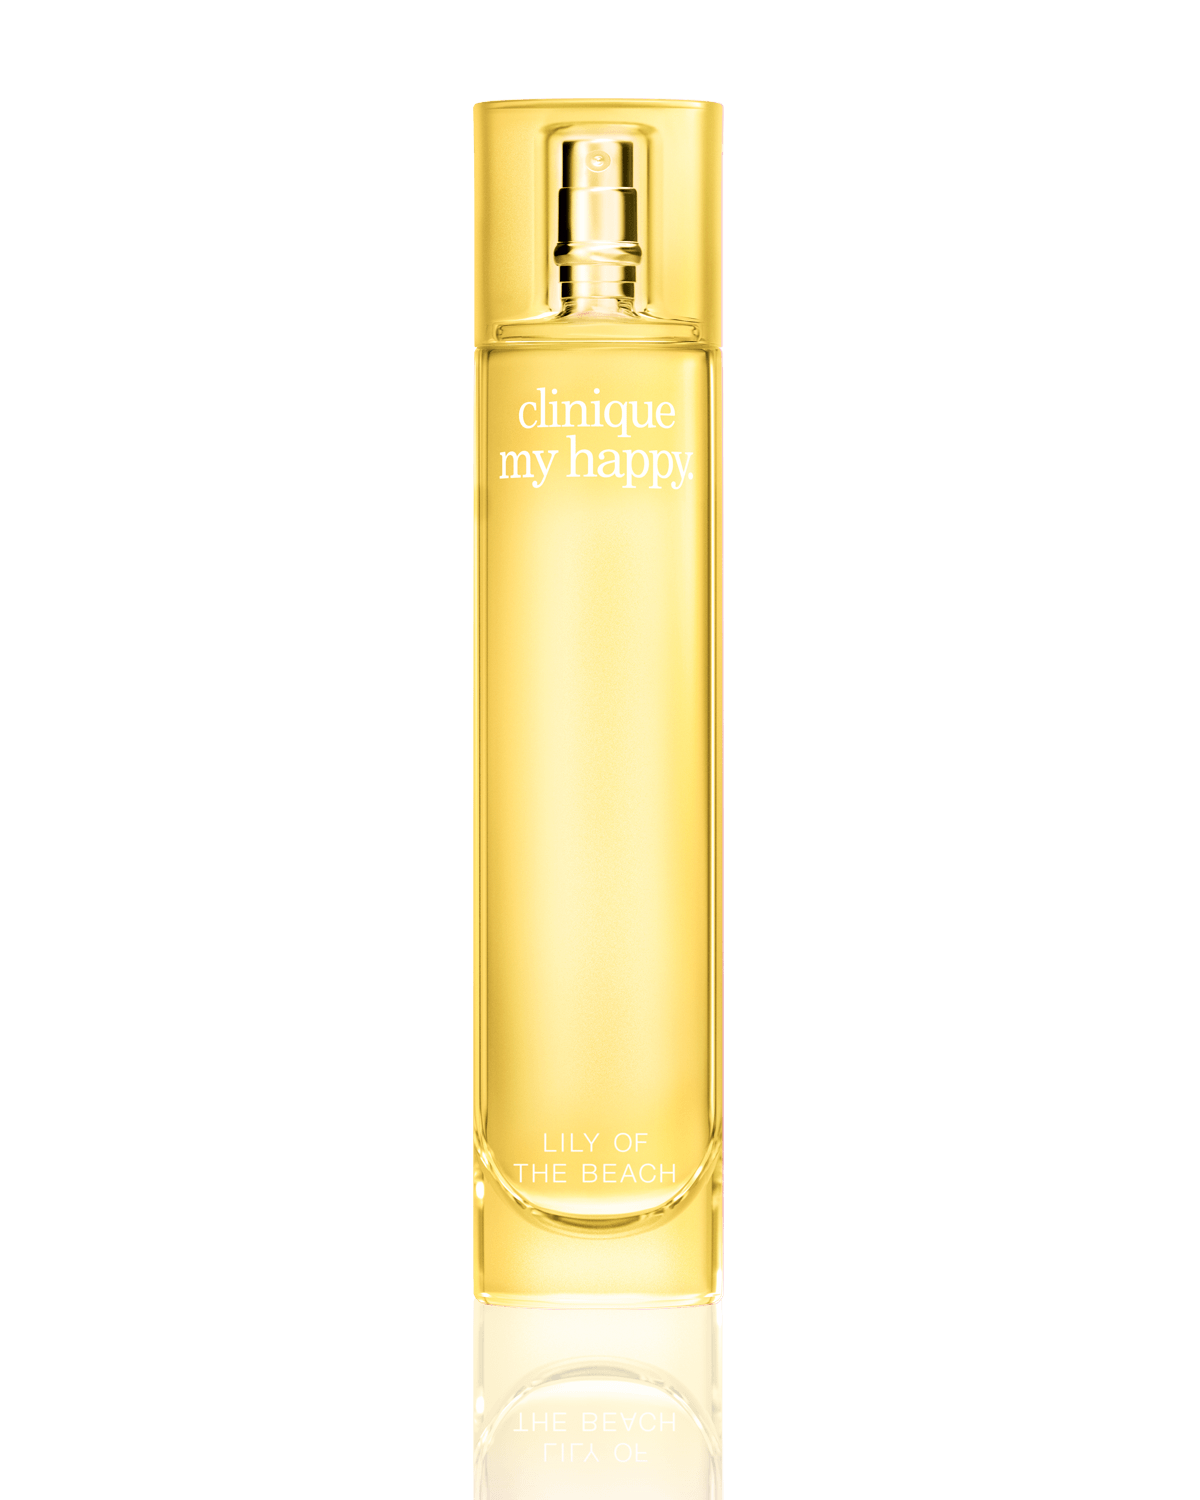 Clinique My Happy Lily Of The Beach Perfume Spray